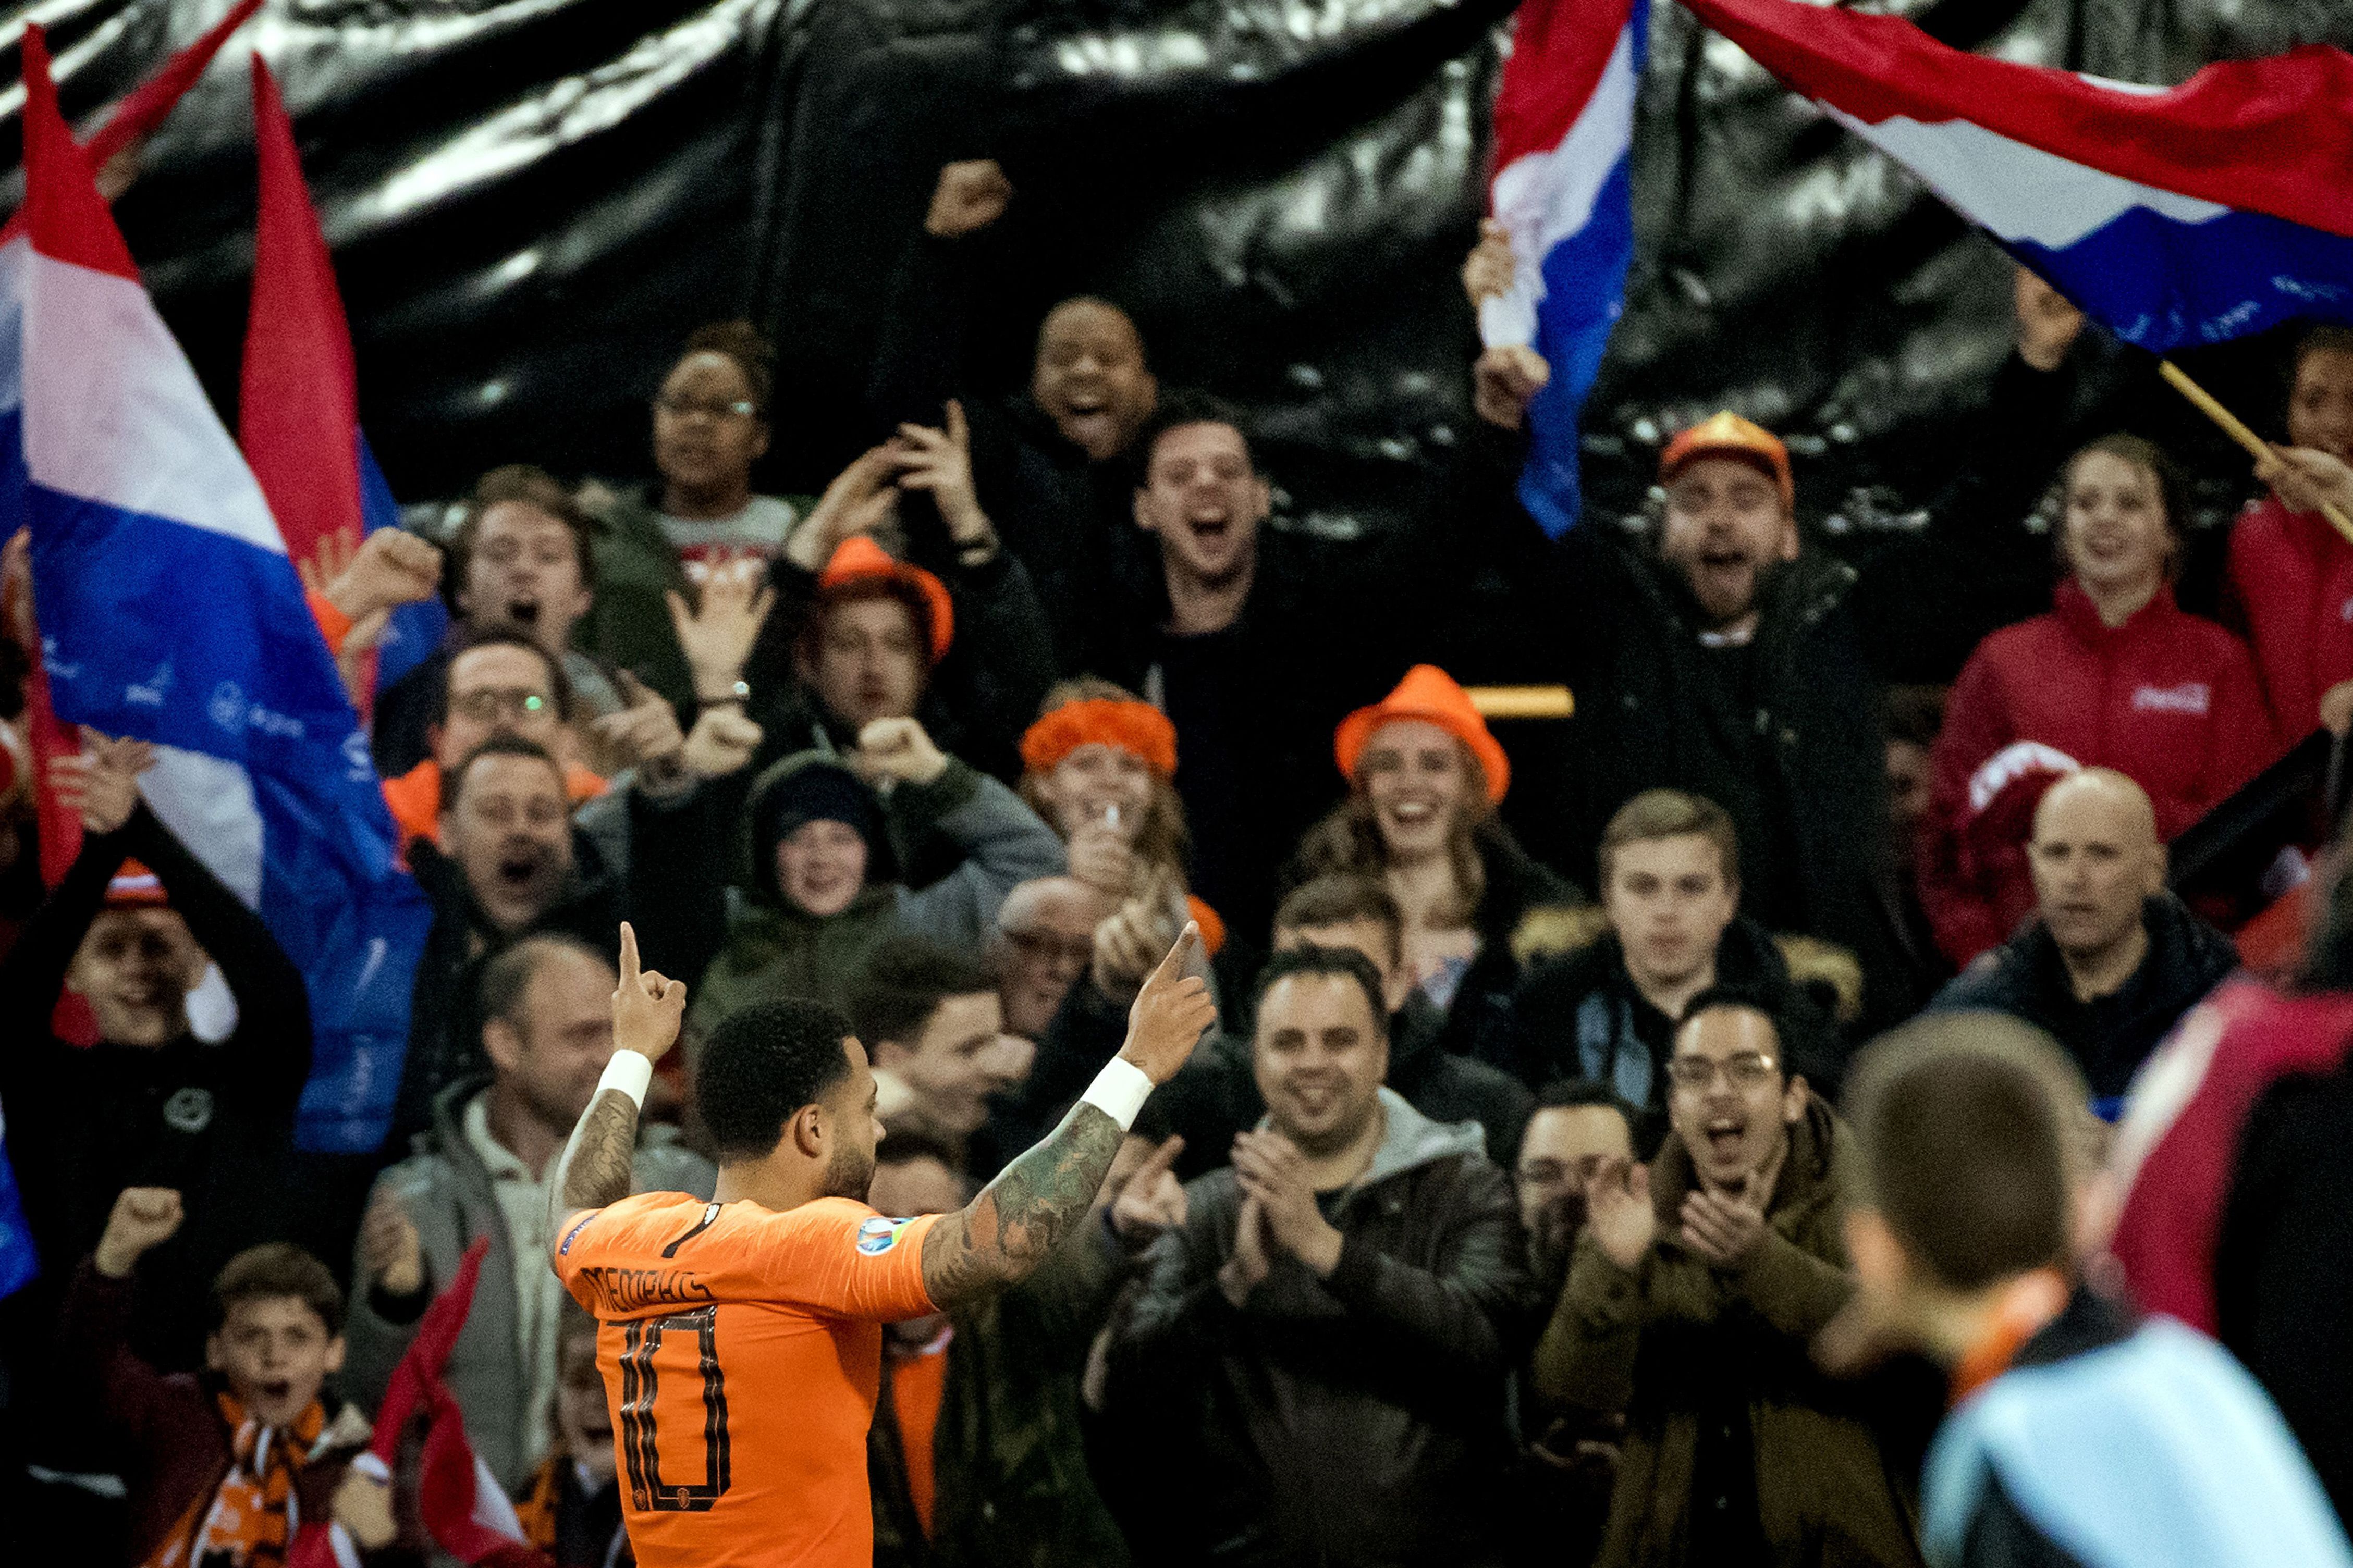 Memphis Depay inspired Netherlands to a 4-0 win over Belarus on Thursday. (Photo by Koen van Weel/AFP/Getty Images)